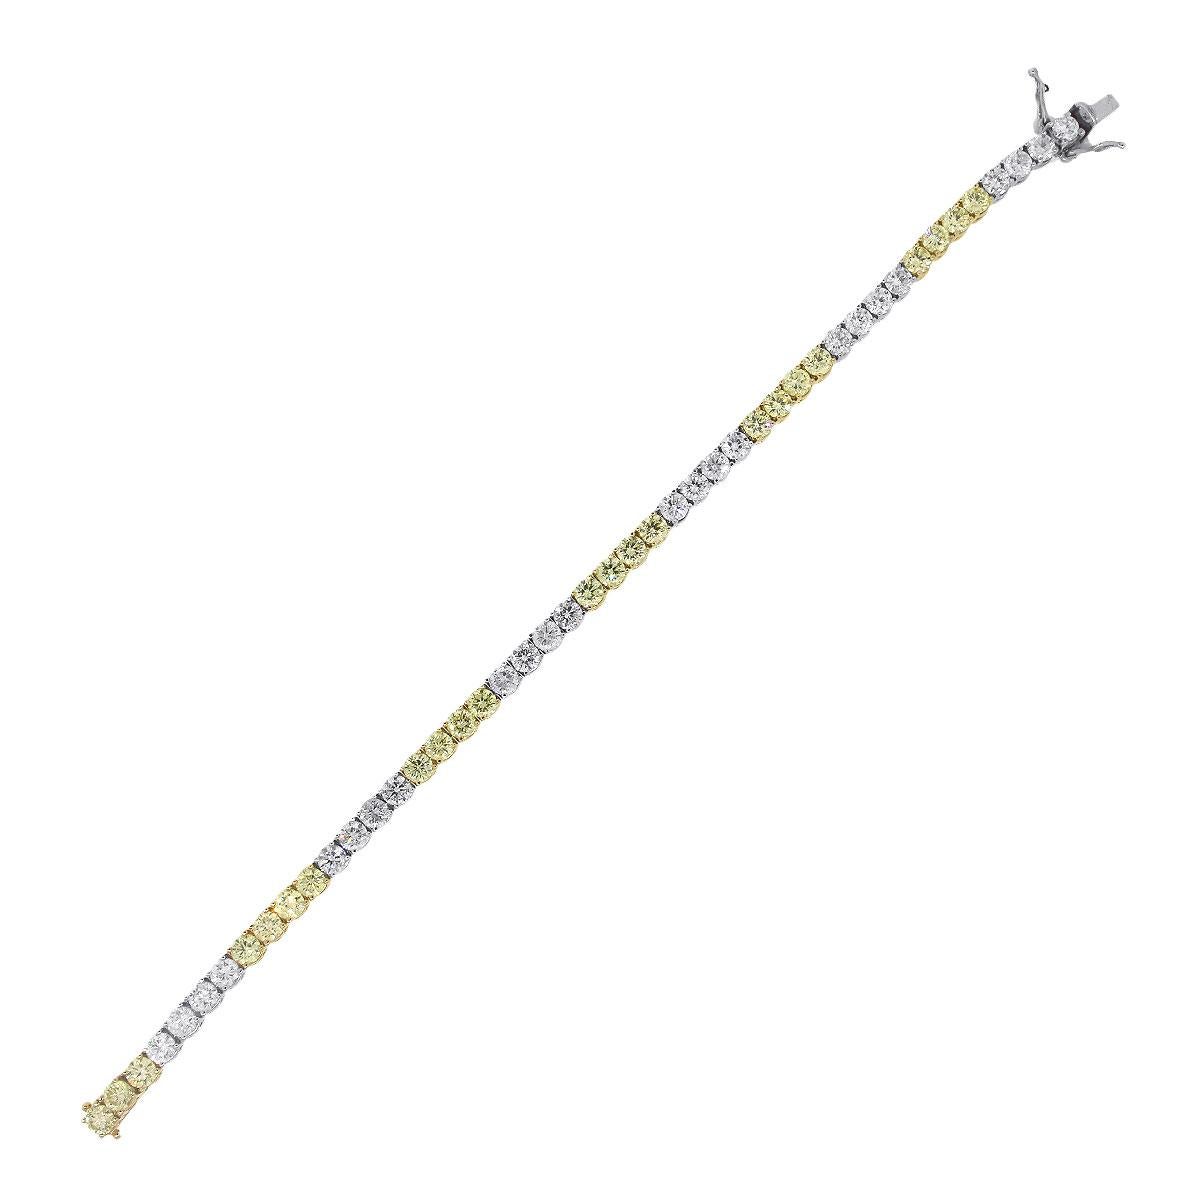 Material: 18k white gold & yellow gold
Diamond Details: Approximately 9.39ctw of round brilliant diamonds. Diamonds are Fancy Yellow, G-H in color and SI-I1 in clarity
Clasp: Tongue in box with safety
Measurements: Will fit a 7″ wrist
Total Weight: